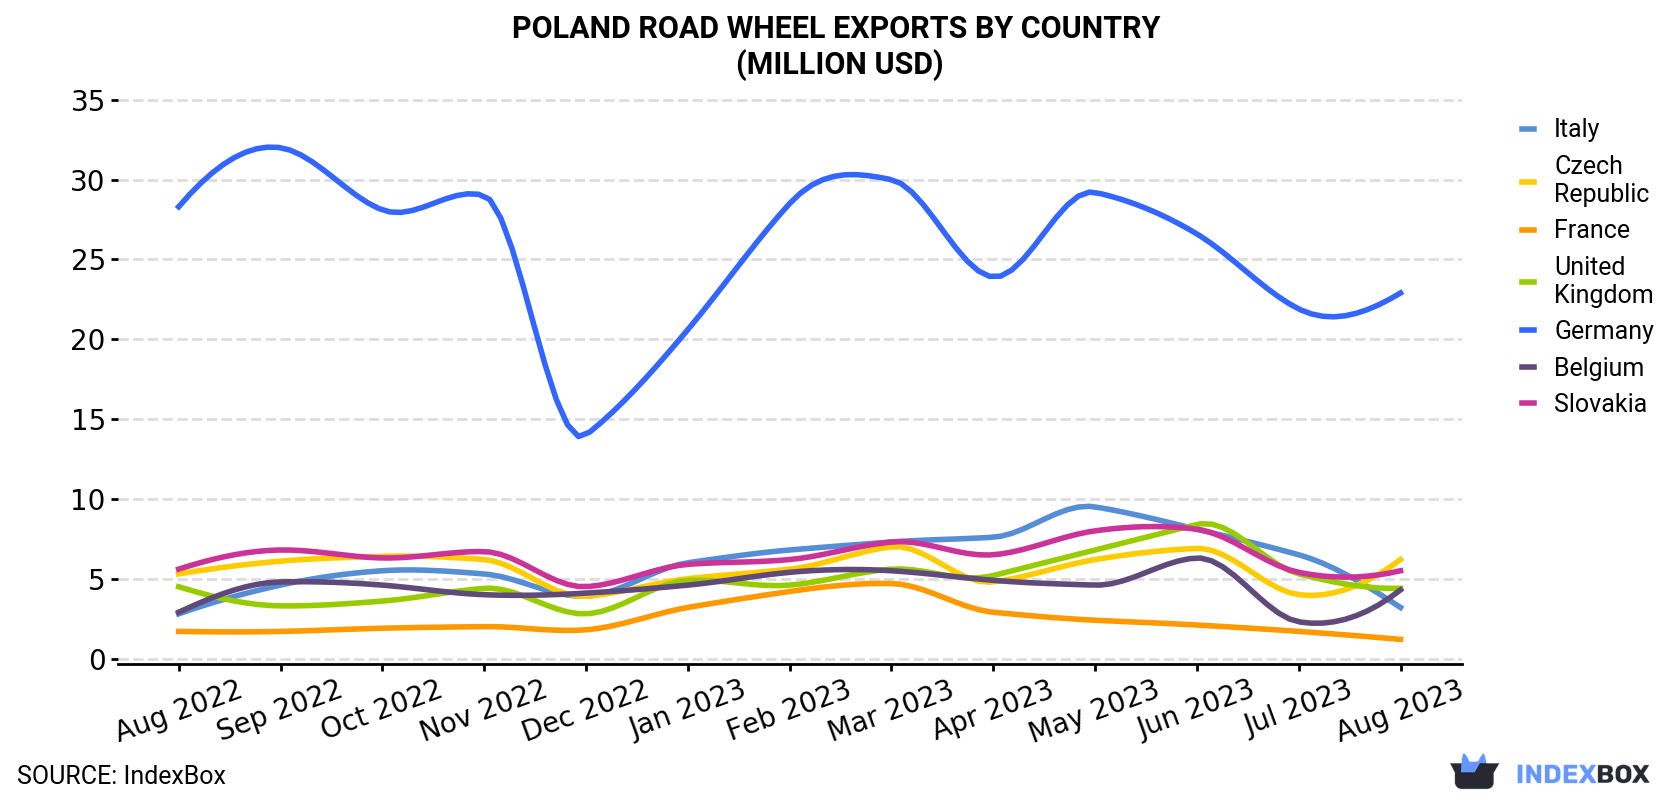 Poland Road Wheel Exports By Country (Million USD)